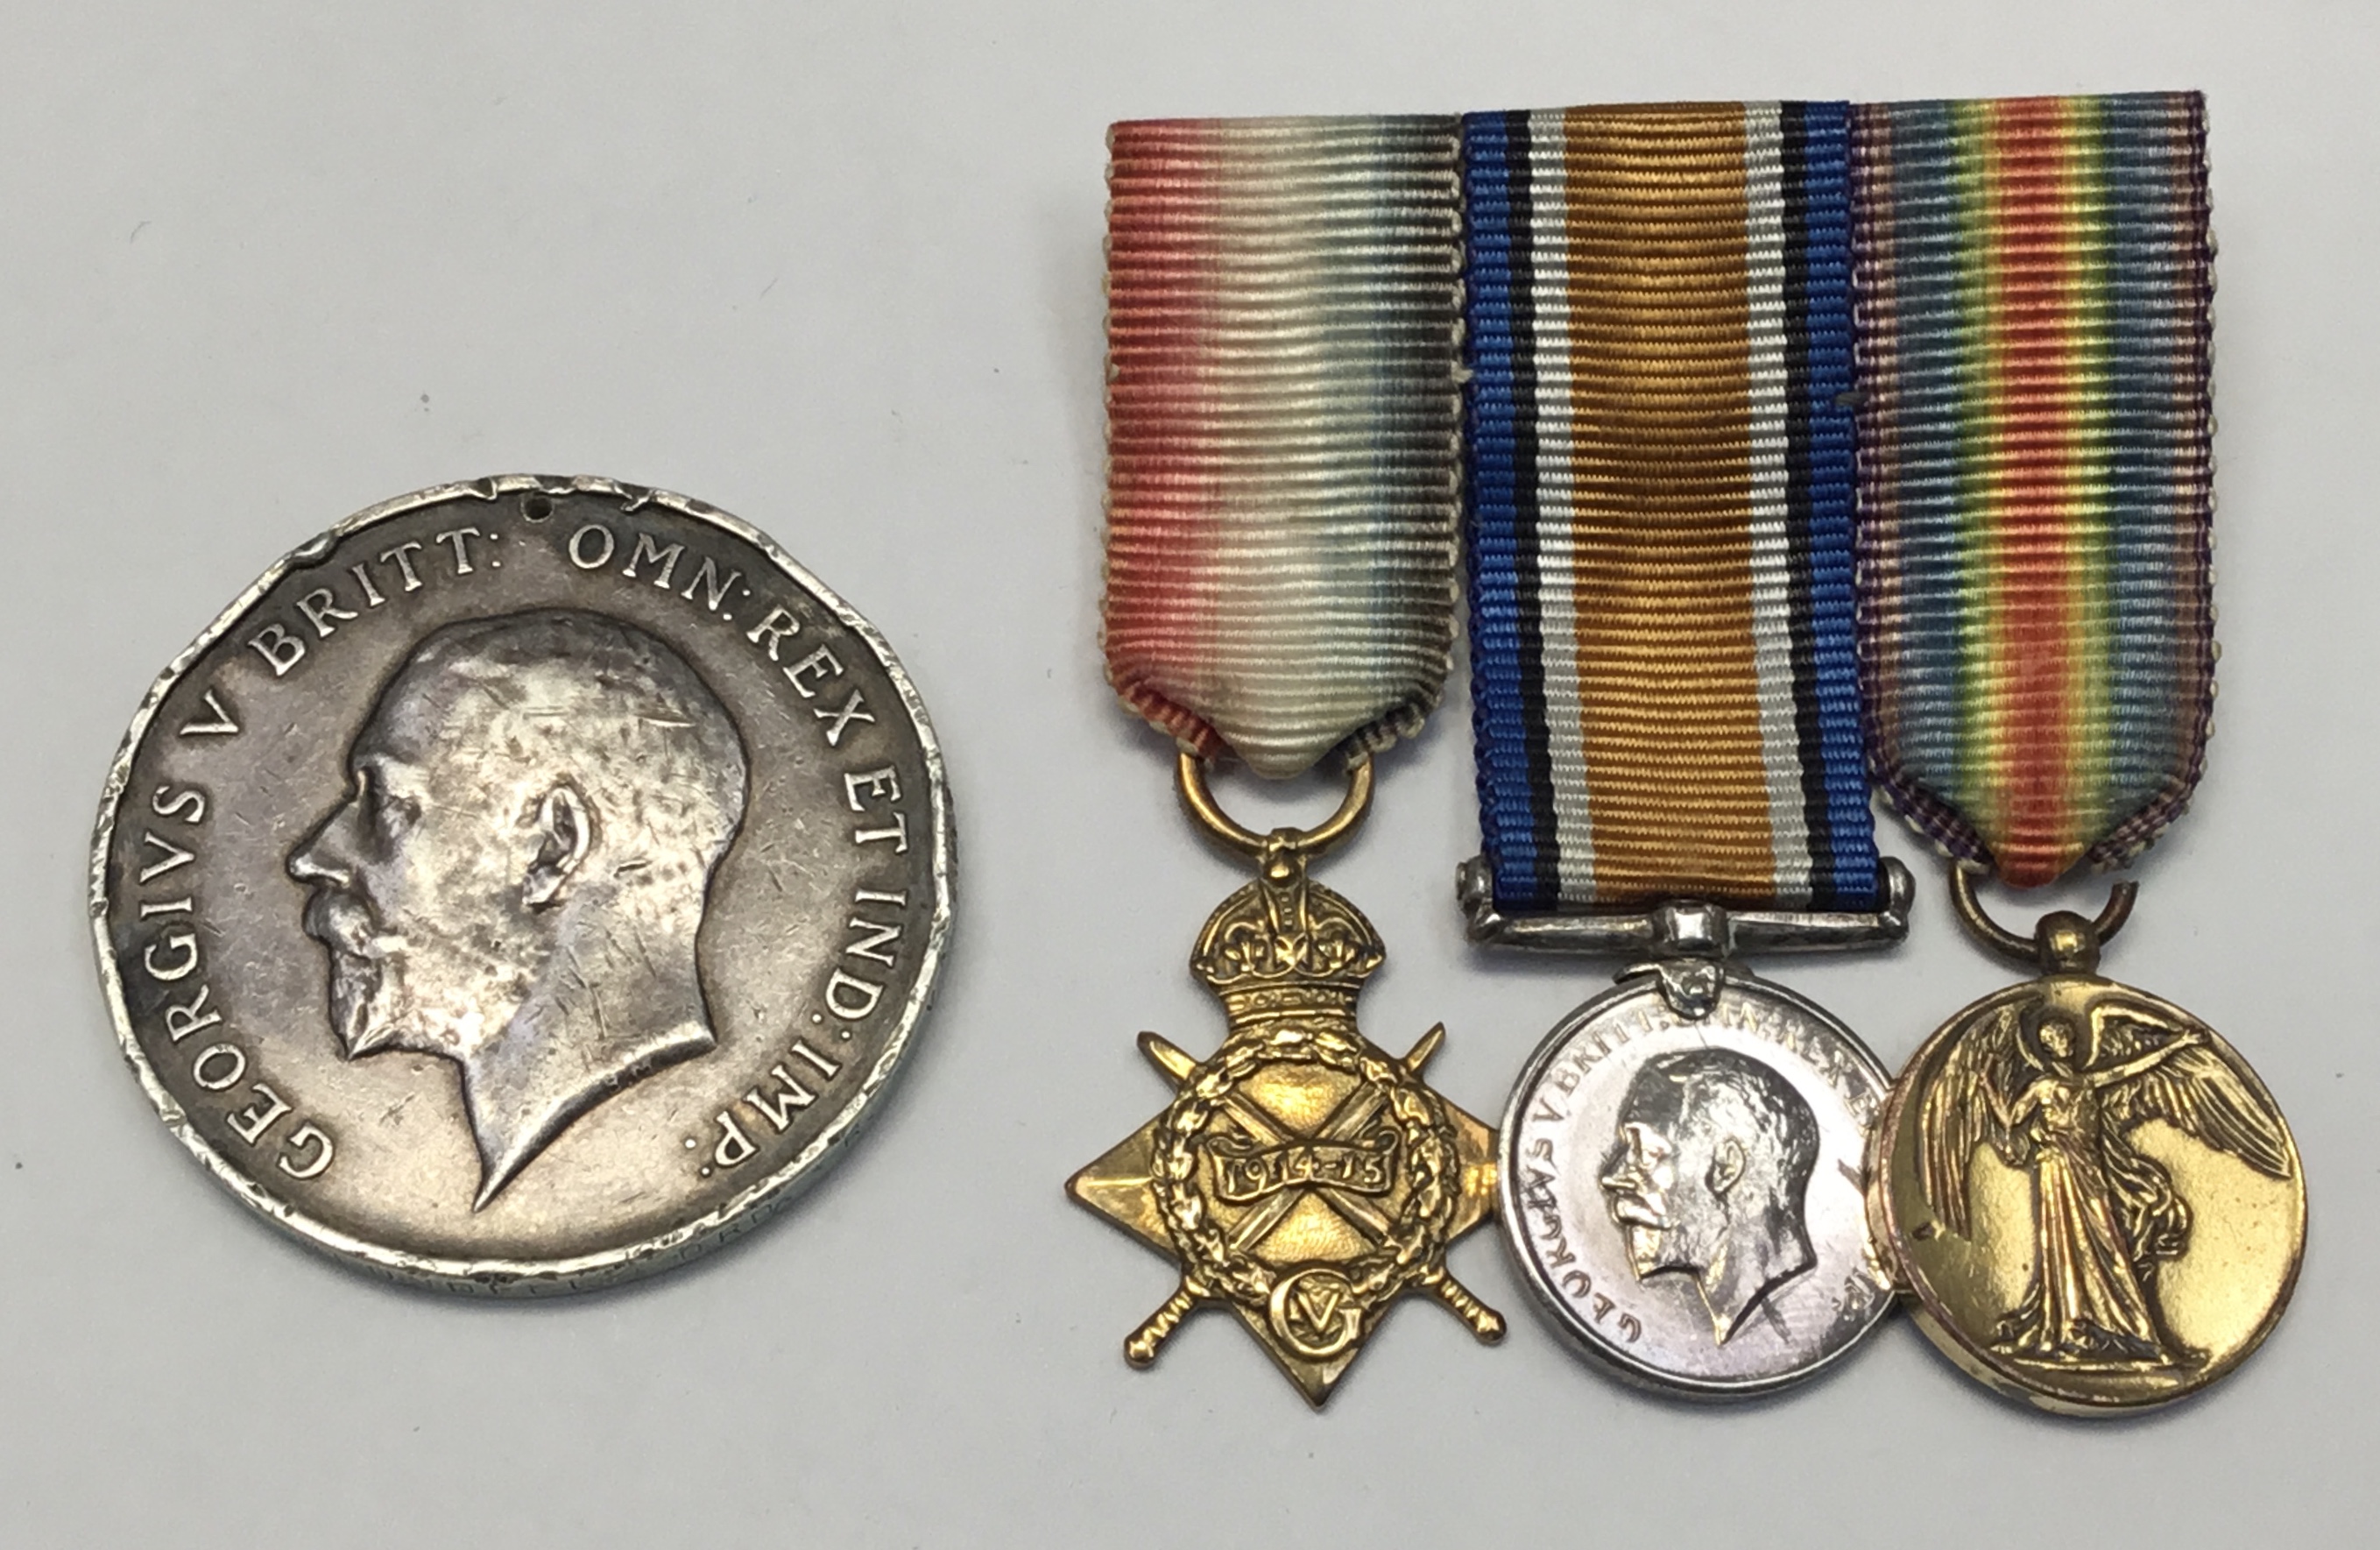 A WW2 British War Medal (disc only), awarded to M.Z.2709 Ord Thomas Blundell of the Royal Navy